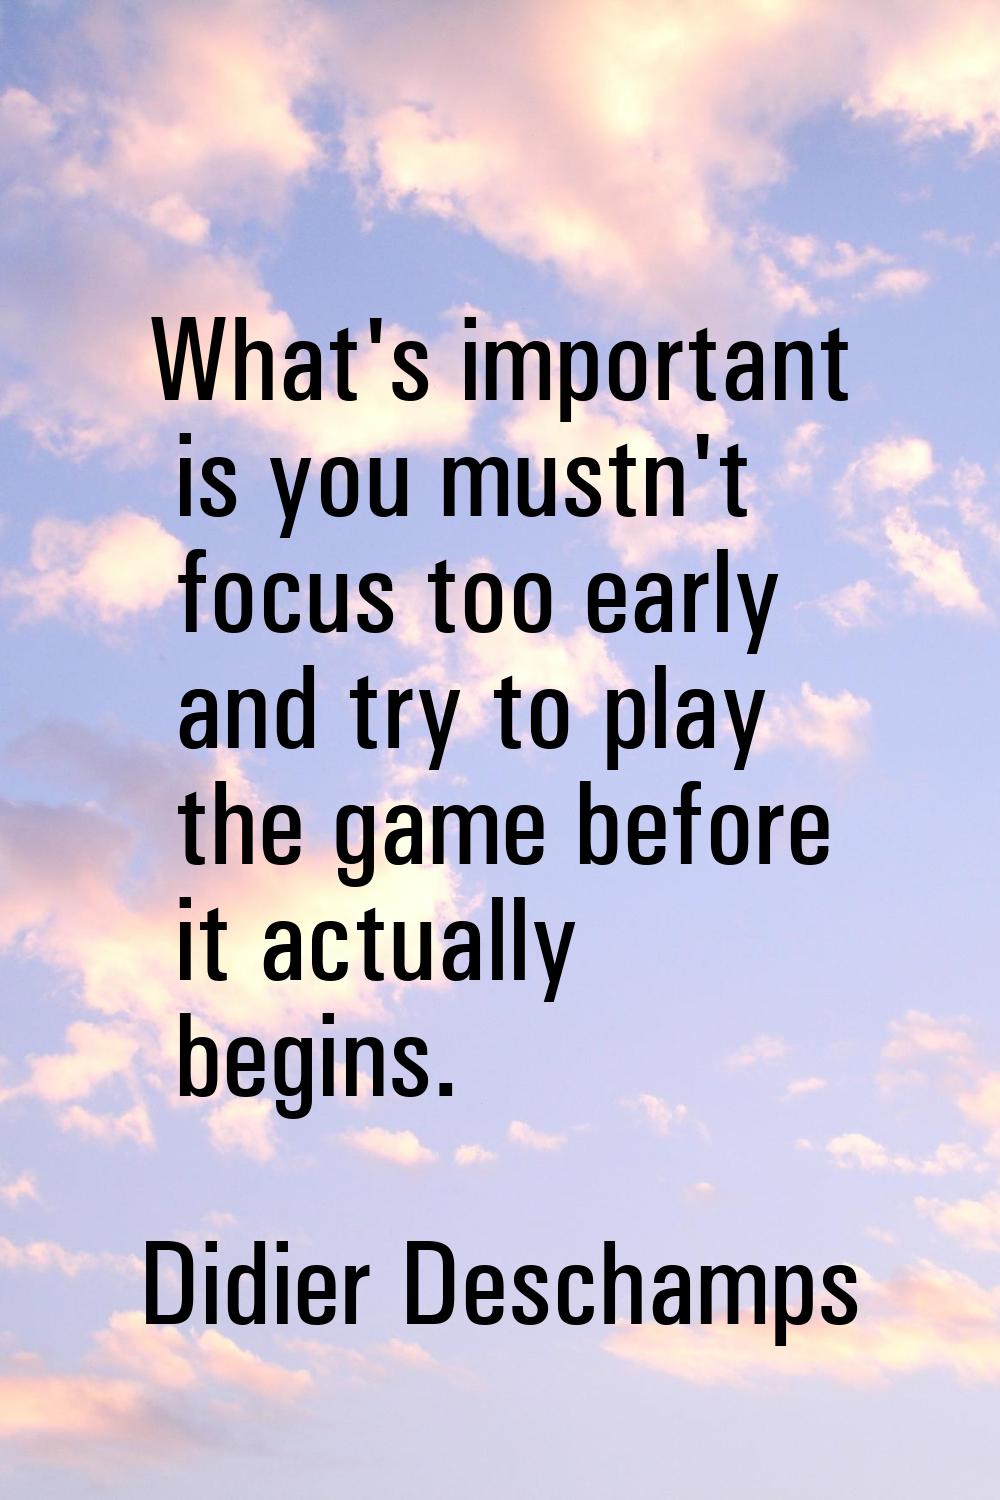 What's important is you mustn't focus too early and try to play the game before it actually begins.